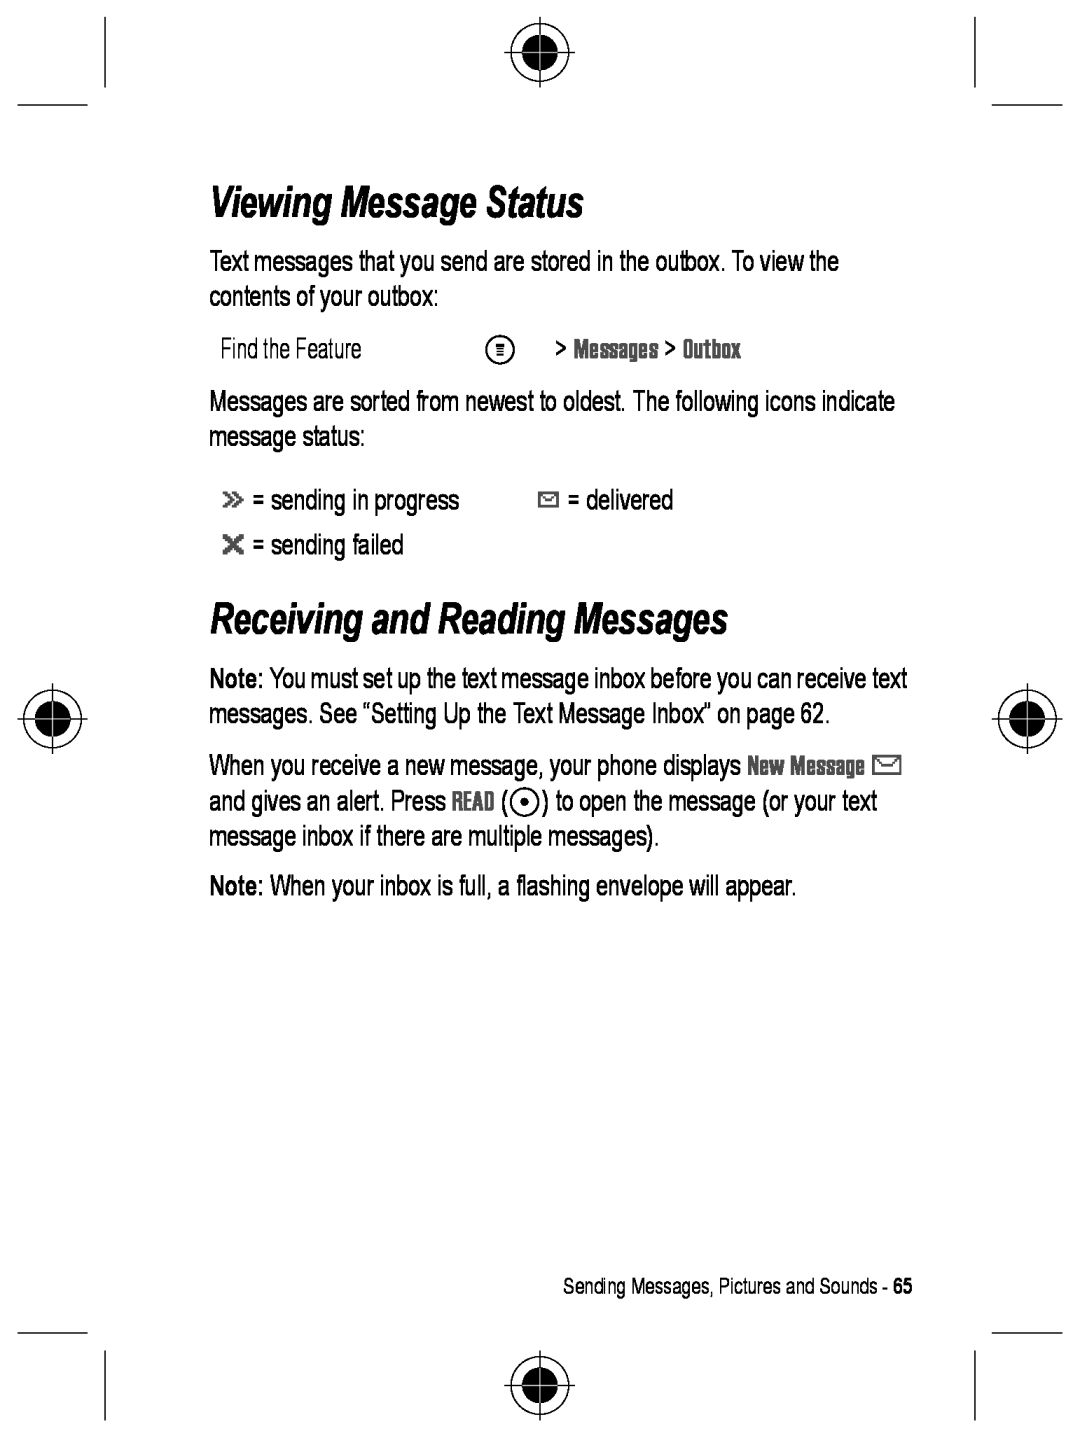 Motorola C330 manual Viewing Message Status, Receiving and Reading Messages, M Messages Outbox 